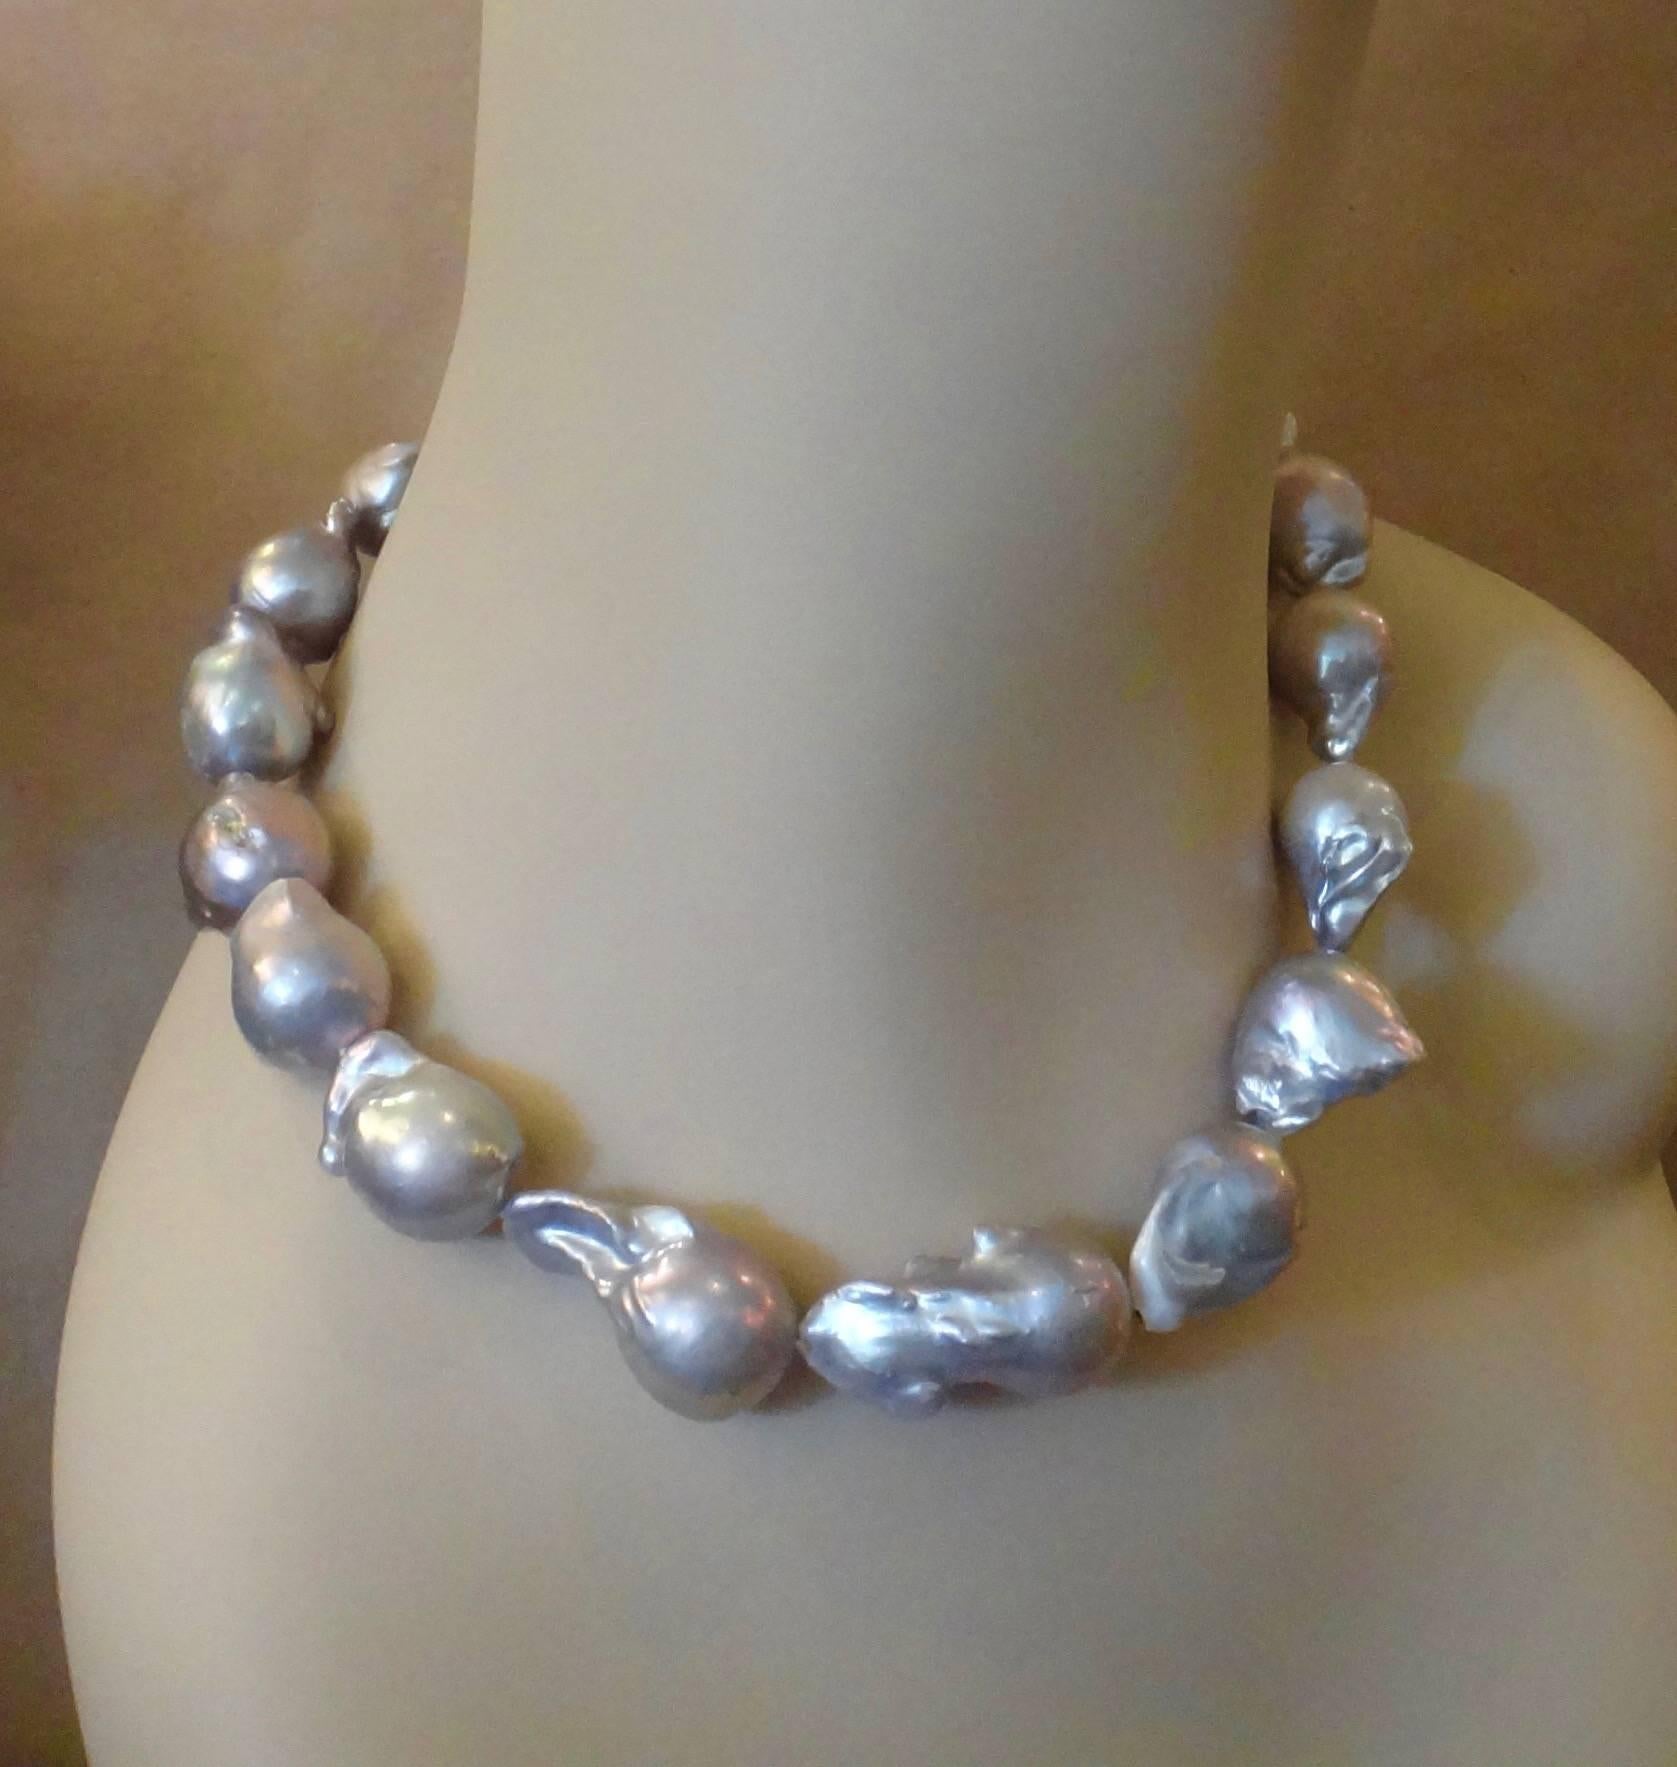 Eighteen ginormous gray baroque freshwater pearls make up this eighteen inch necklace.  The pearls graduate in size from approximately 18 x 20mm to a huge 23 x 35mm.  The rare gray body color has lovely undertones of pink and green and the pearls